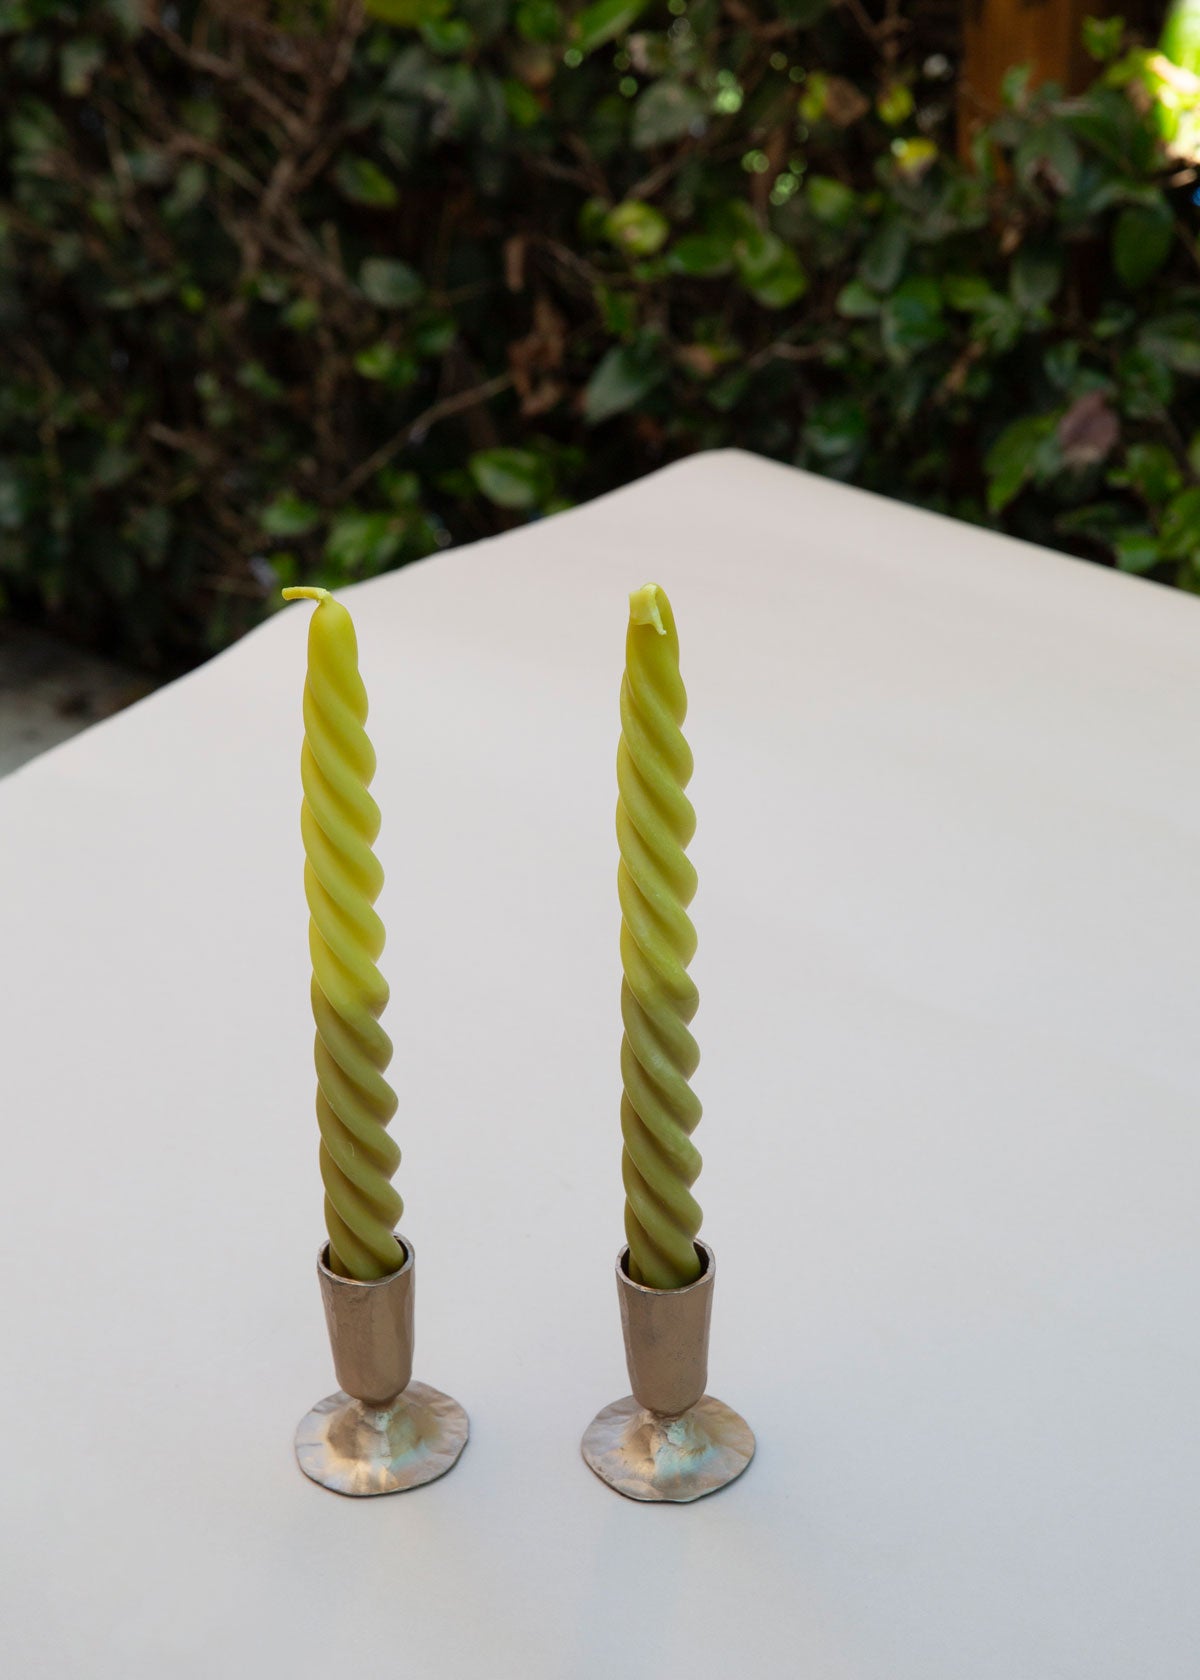 Twisted Taper Candles Set of 2 - Green Ombre